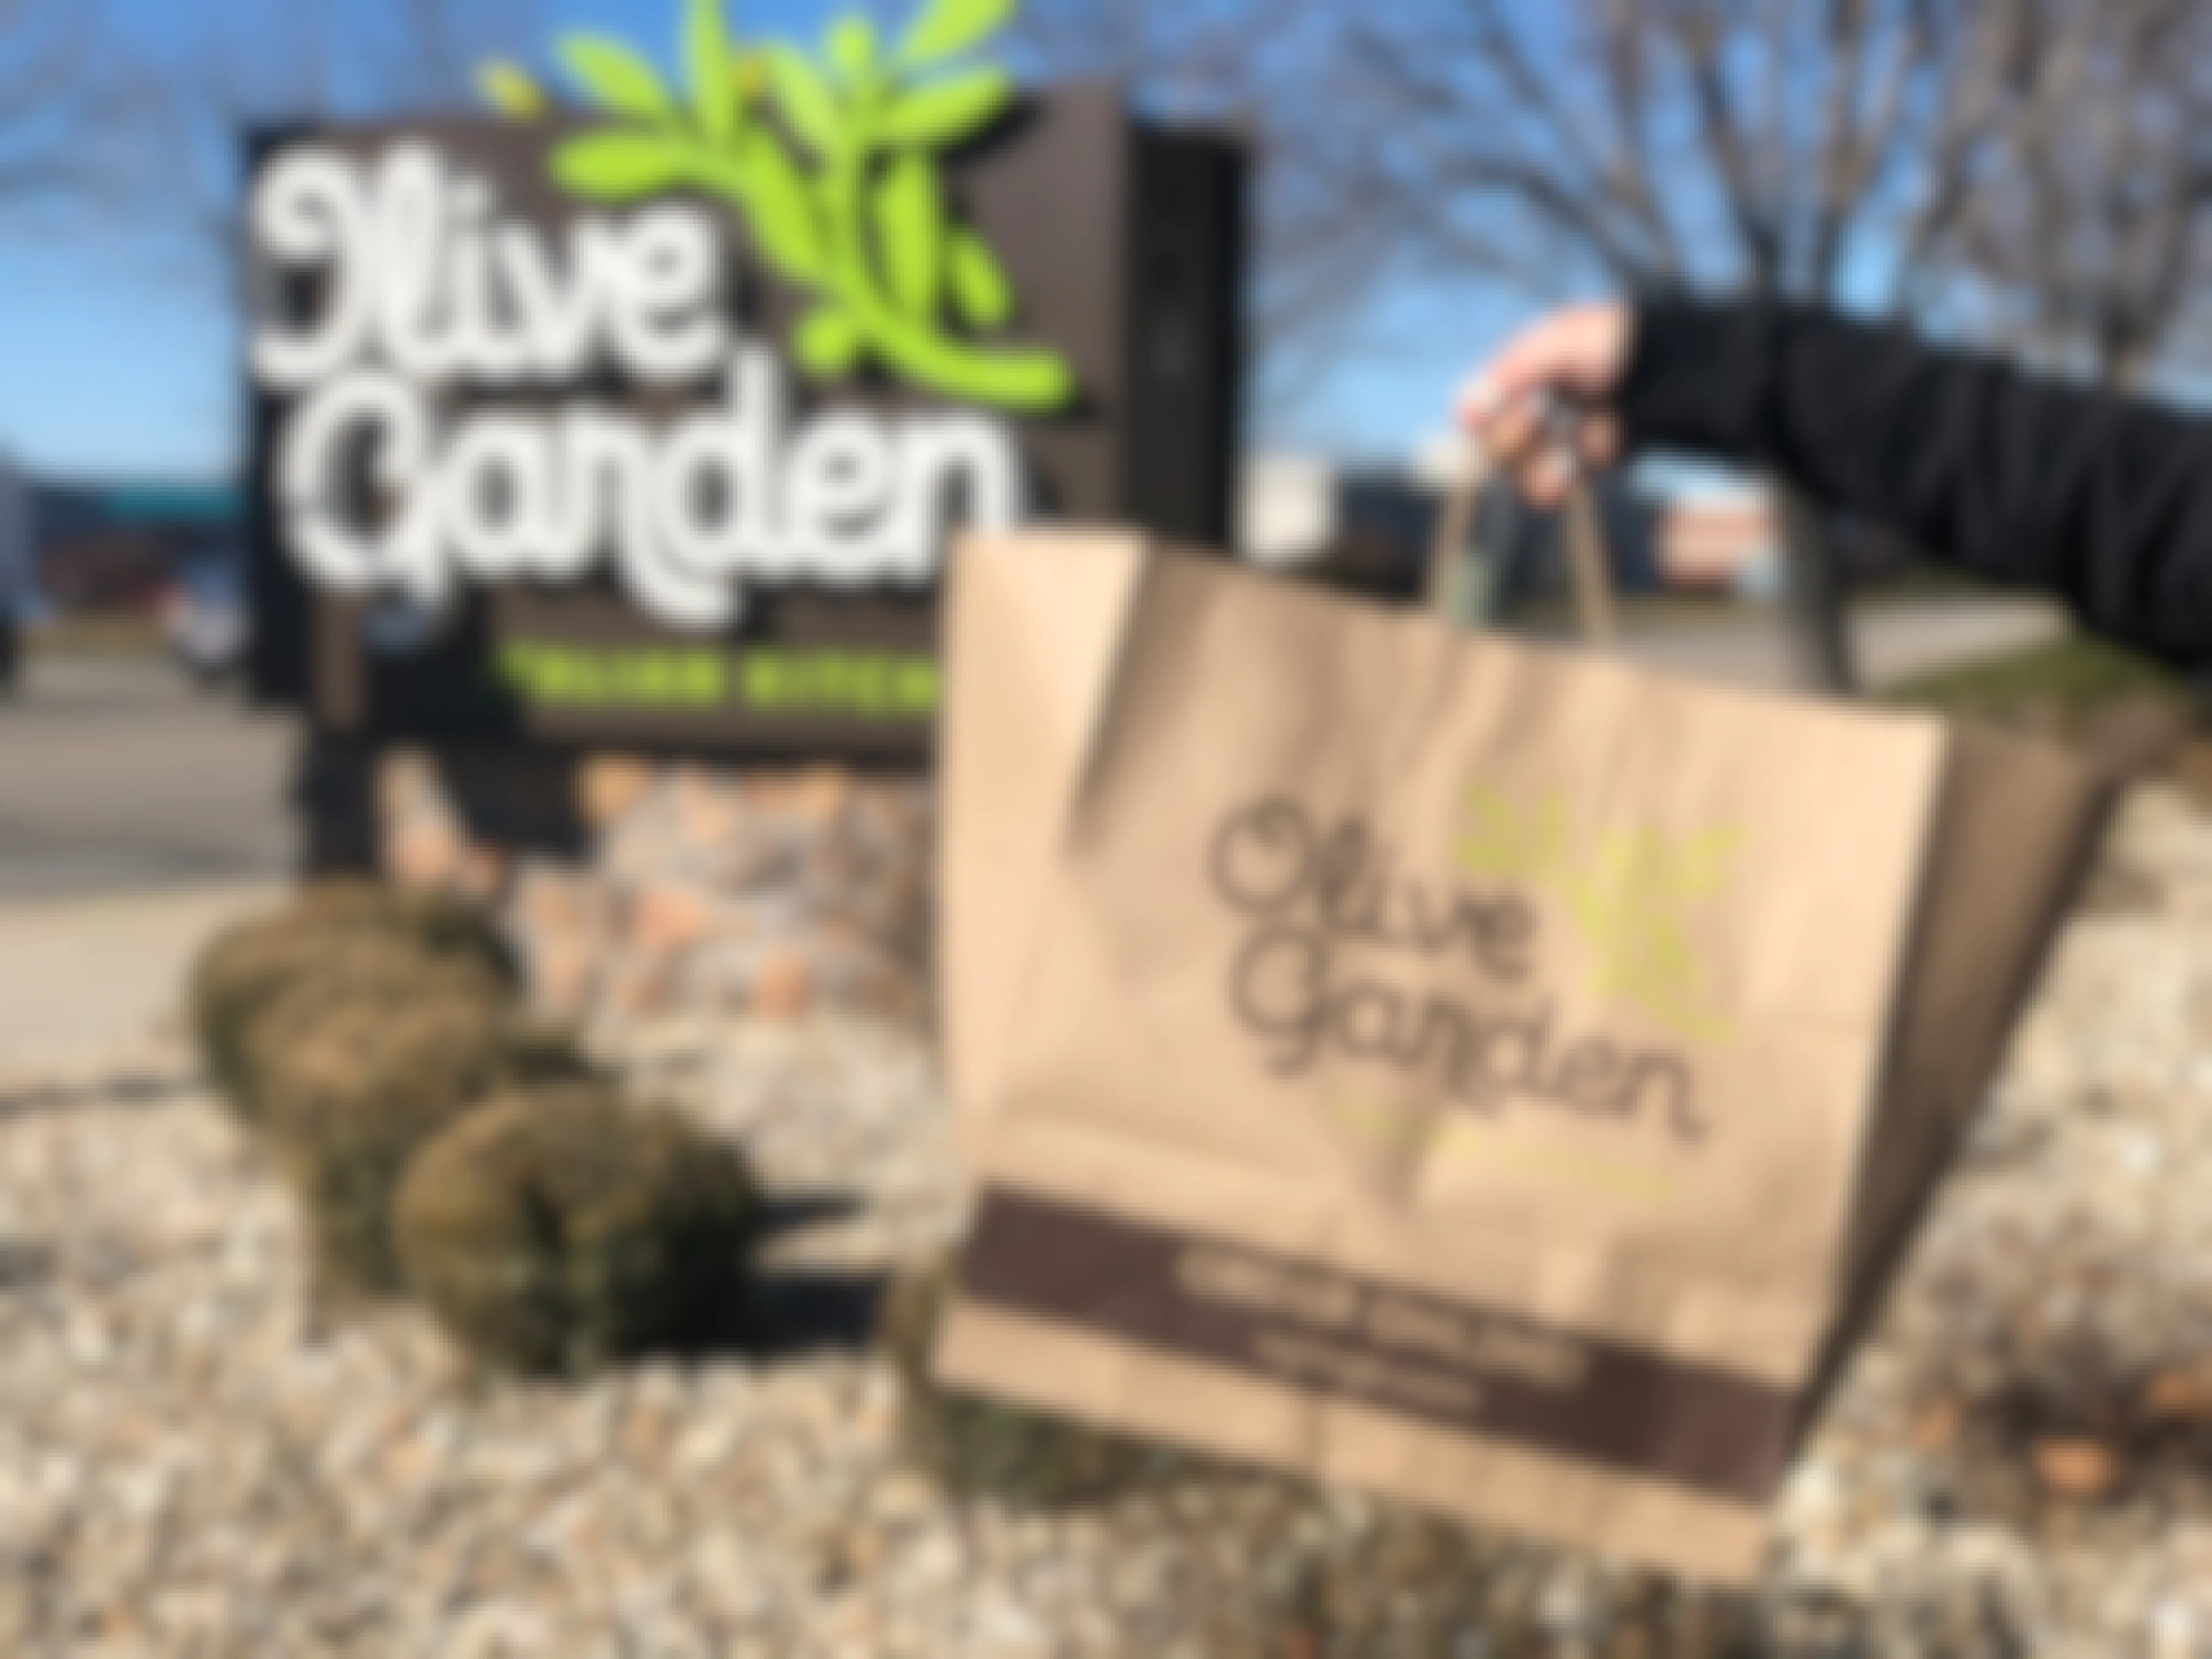 a bag of to go olive garden being held out in front of outside olive garden sign 